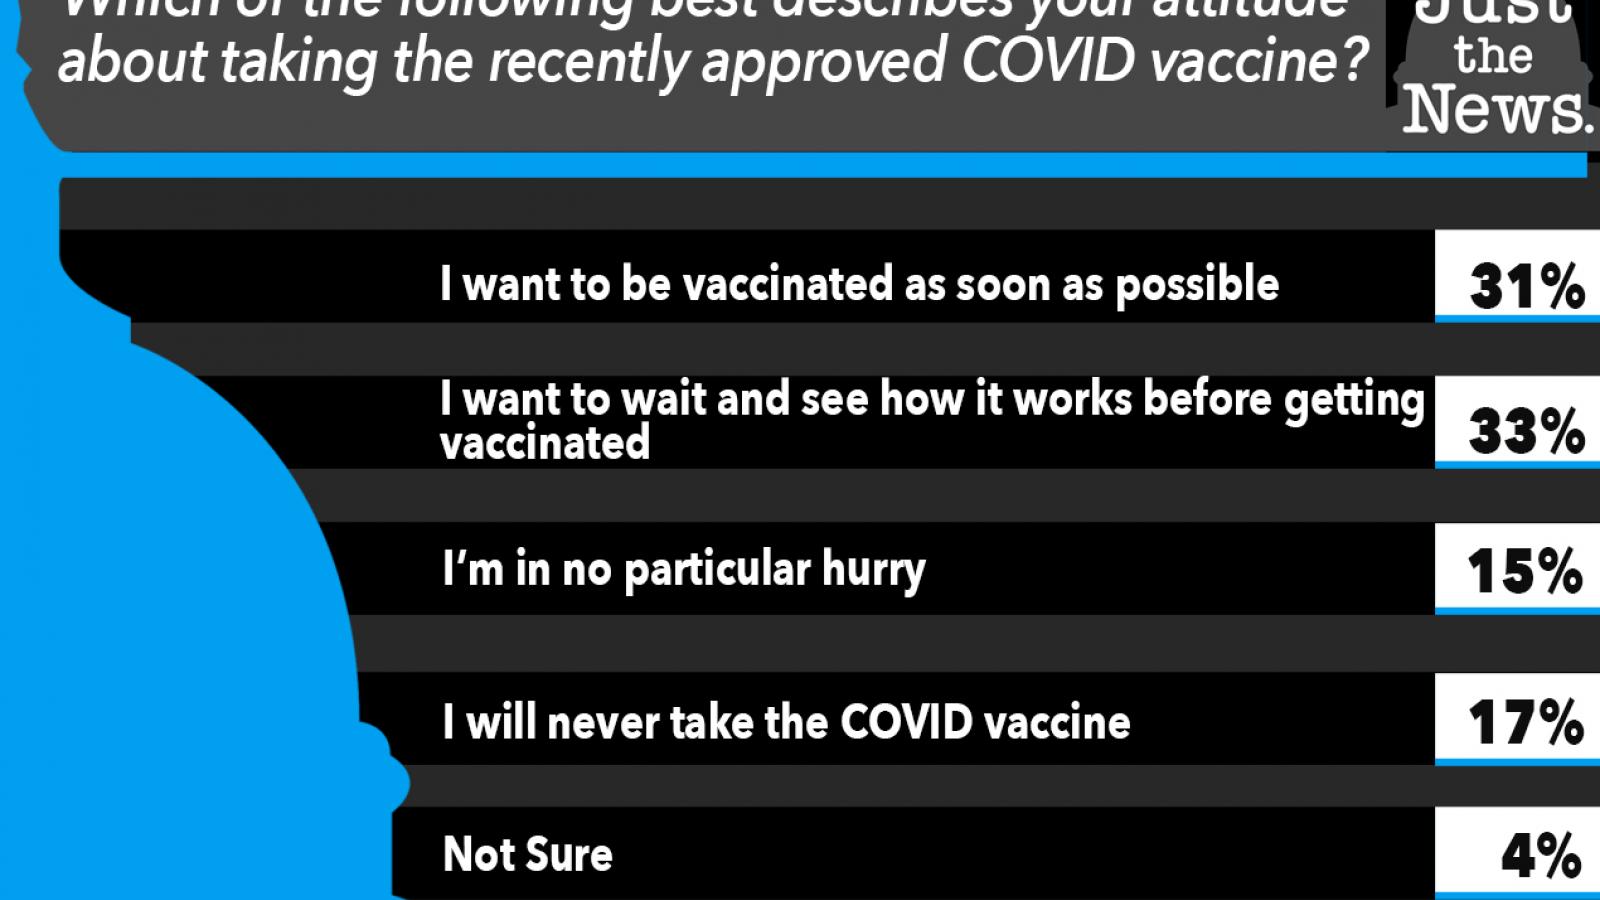 Which of the following best describes your attitude about taking the recently approved COVID vaccine?